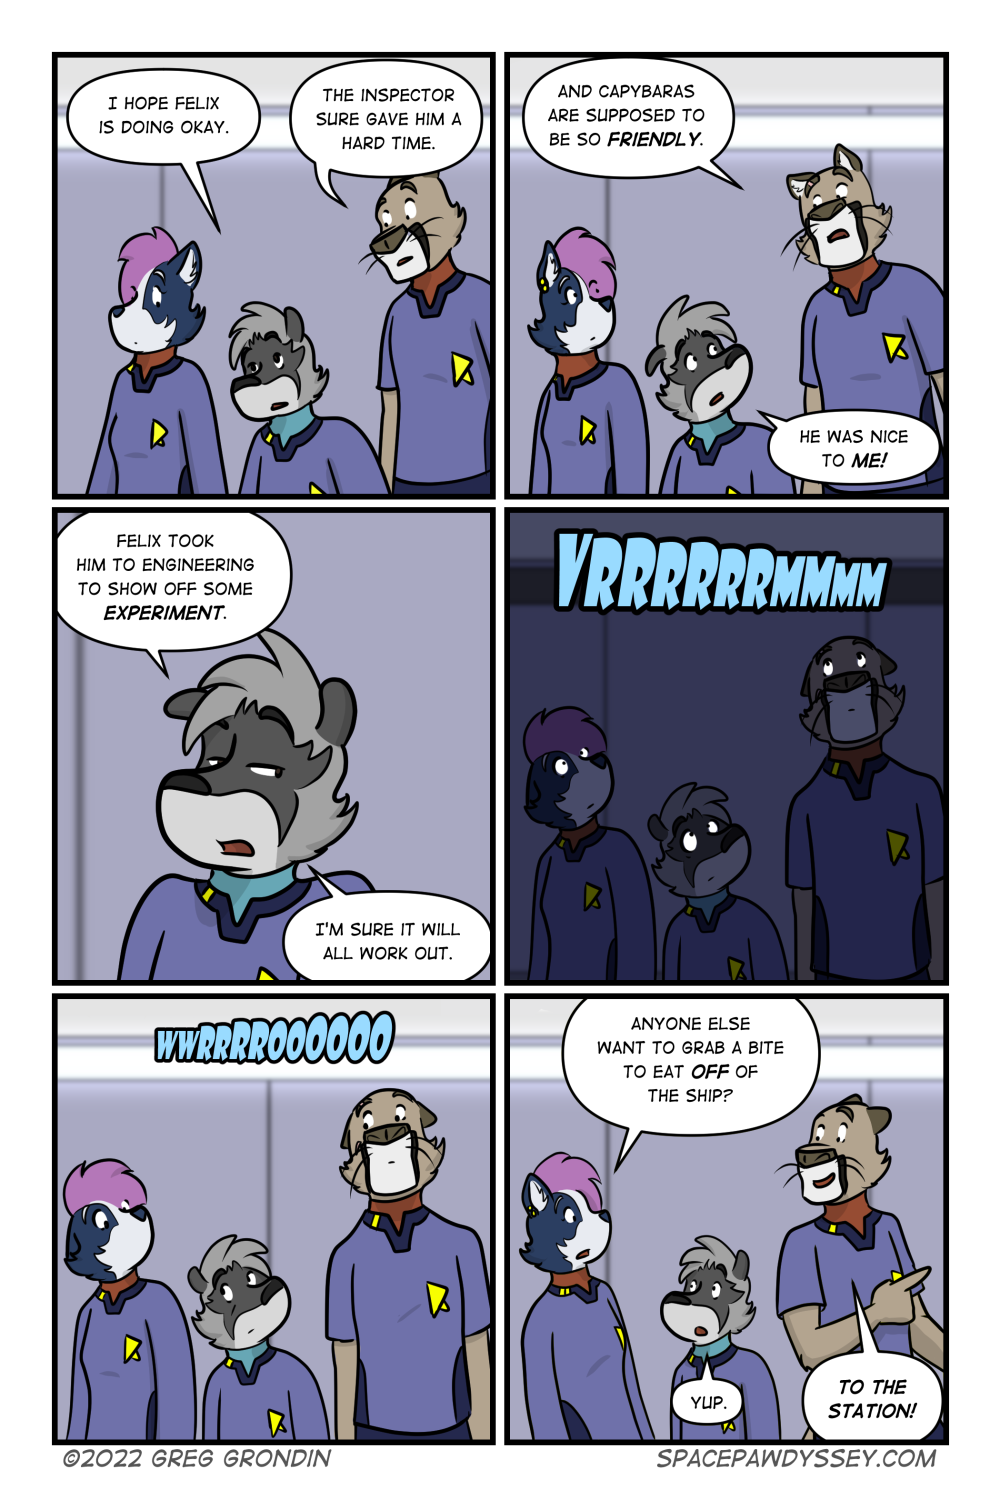 Space Pawdyssey #554